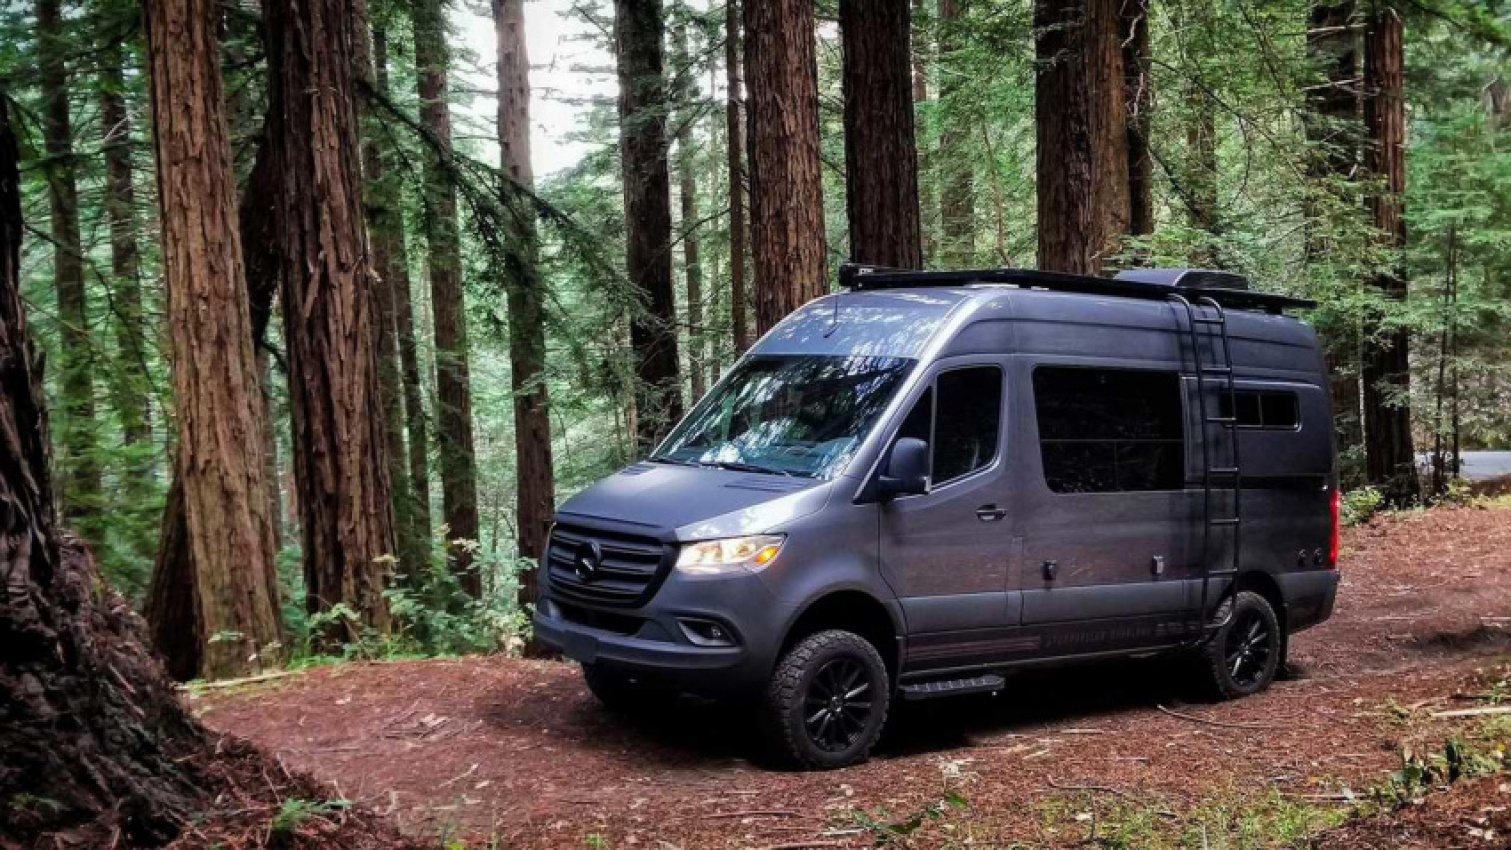 acer, autos, cars, storyteller overland adquiere gxv para hacer campers offroad